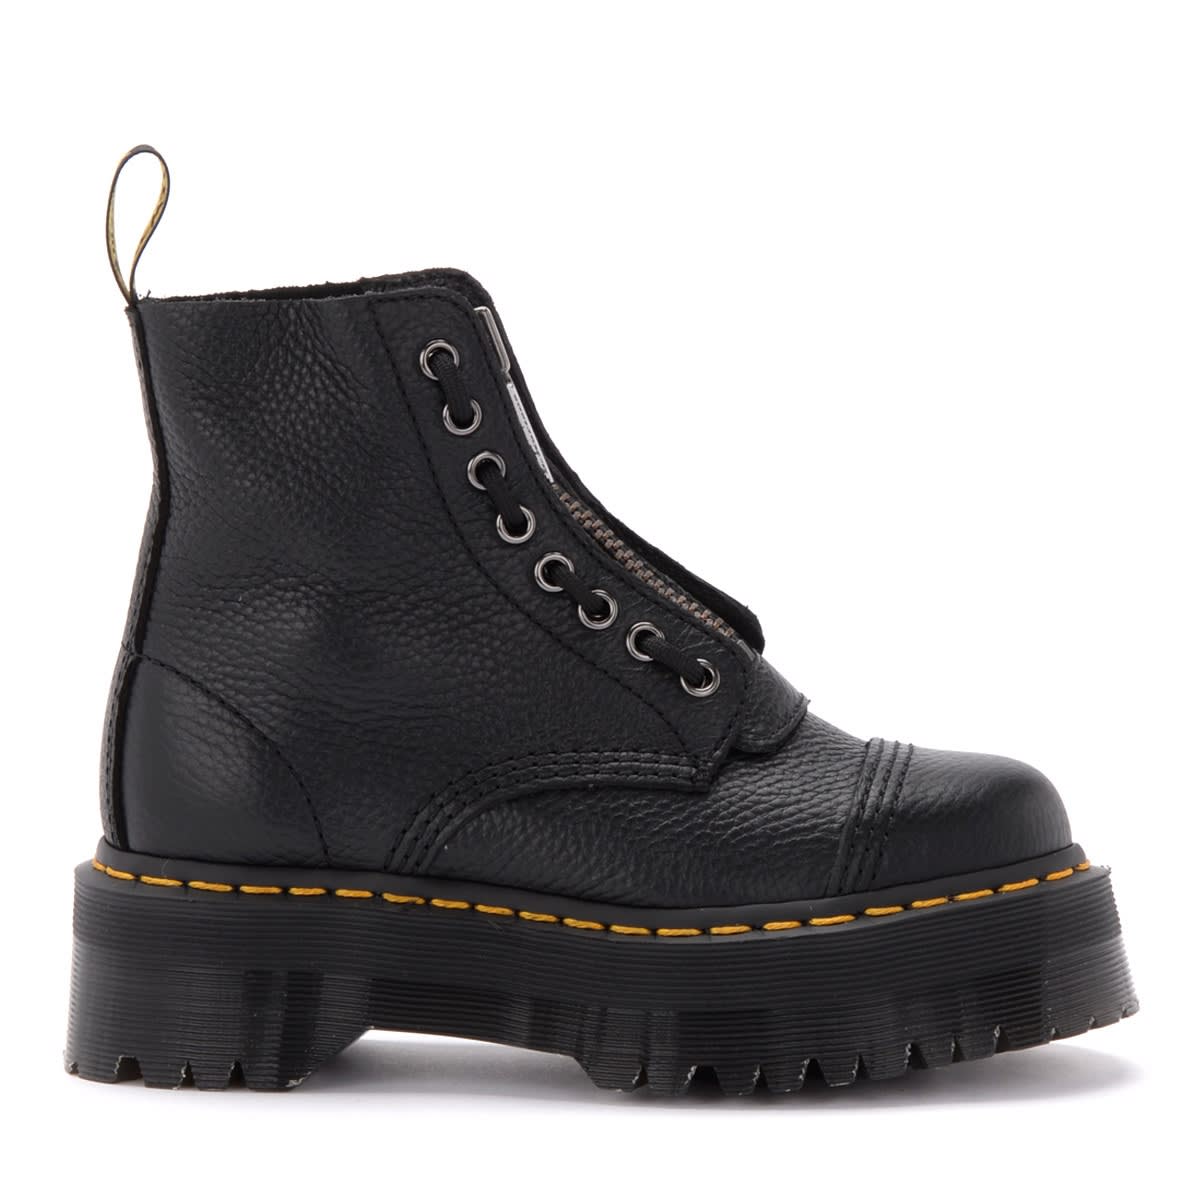 Dr. Martens Sinclair Combat Boot In Black Hammered Leather With A Large Treaded Sole